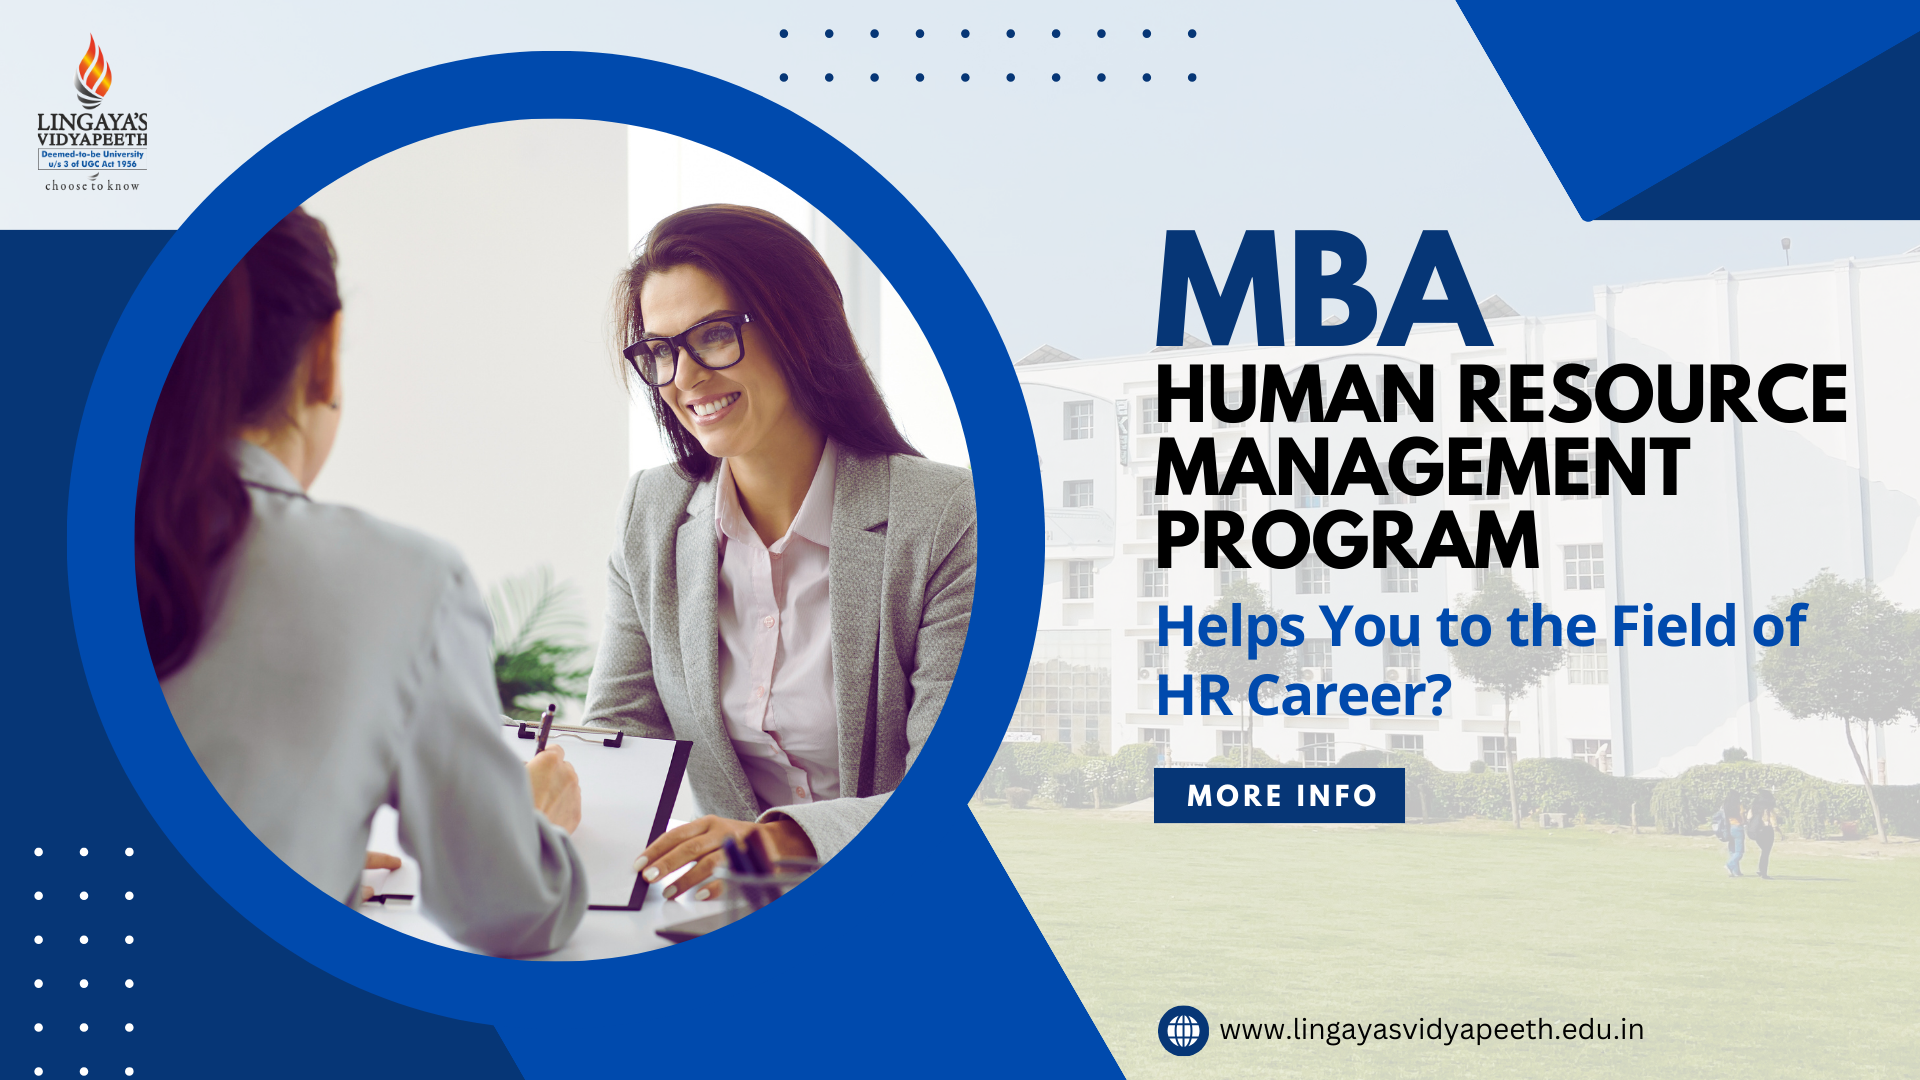 How MBA Human Resource Management Program Helps You to the Field of HR Career?